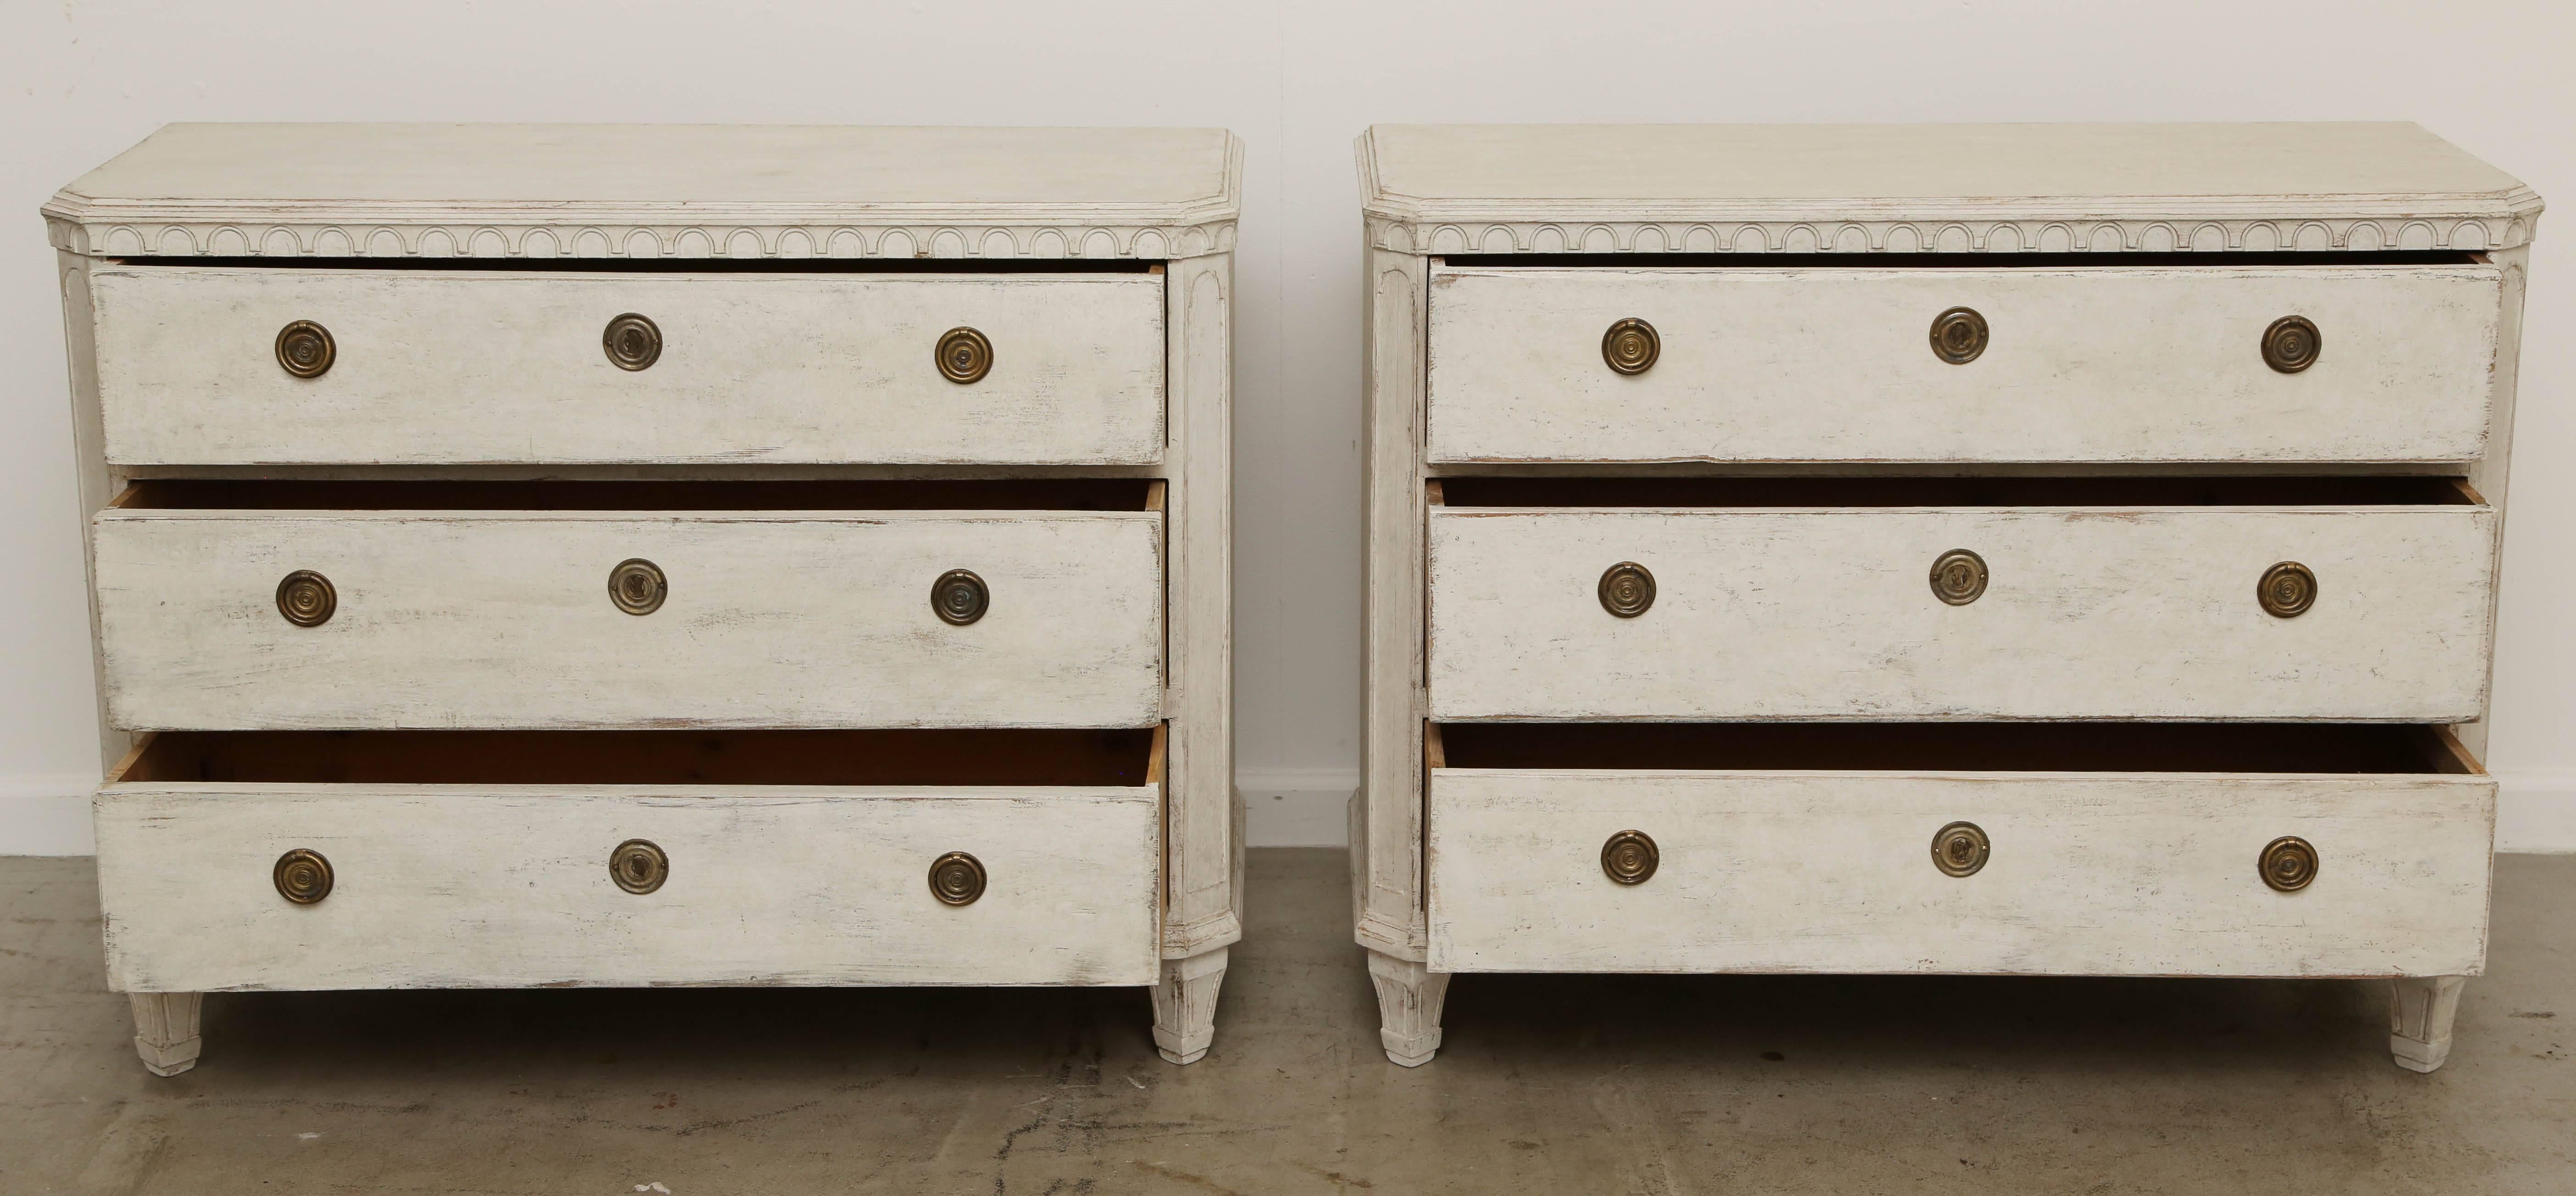 Pair of Antique Swedish Gustavian Style Painted Chests, Late 19th Century 1